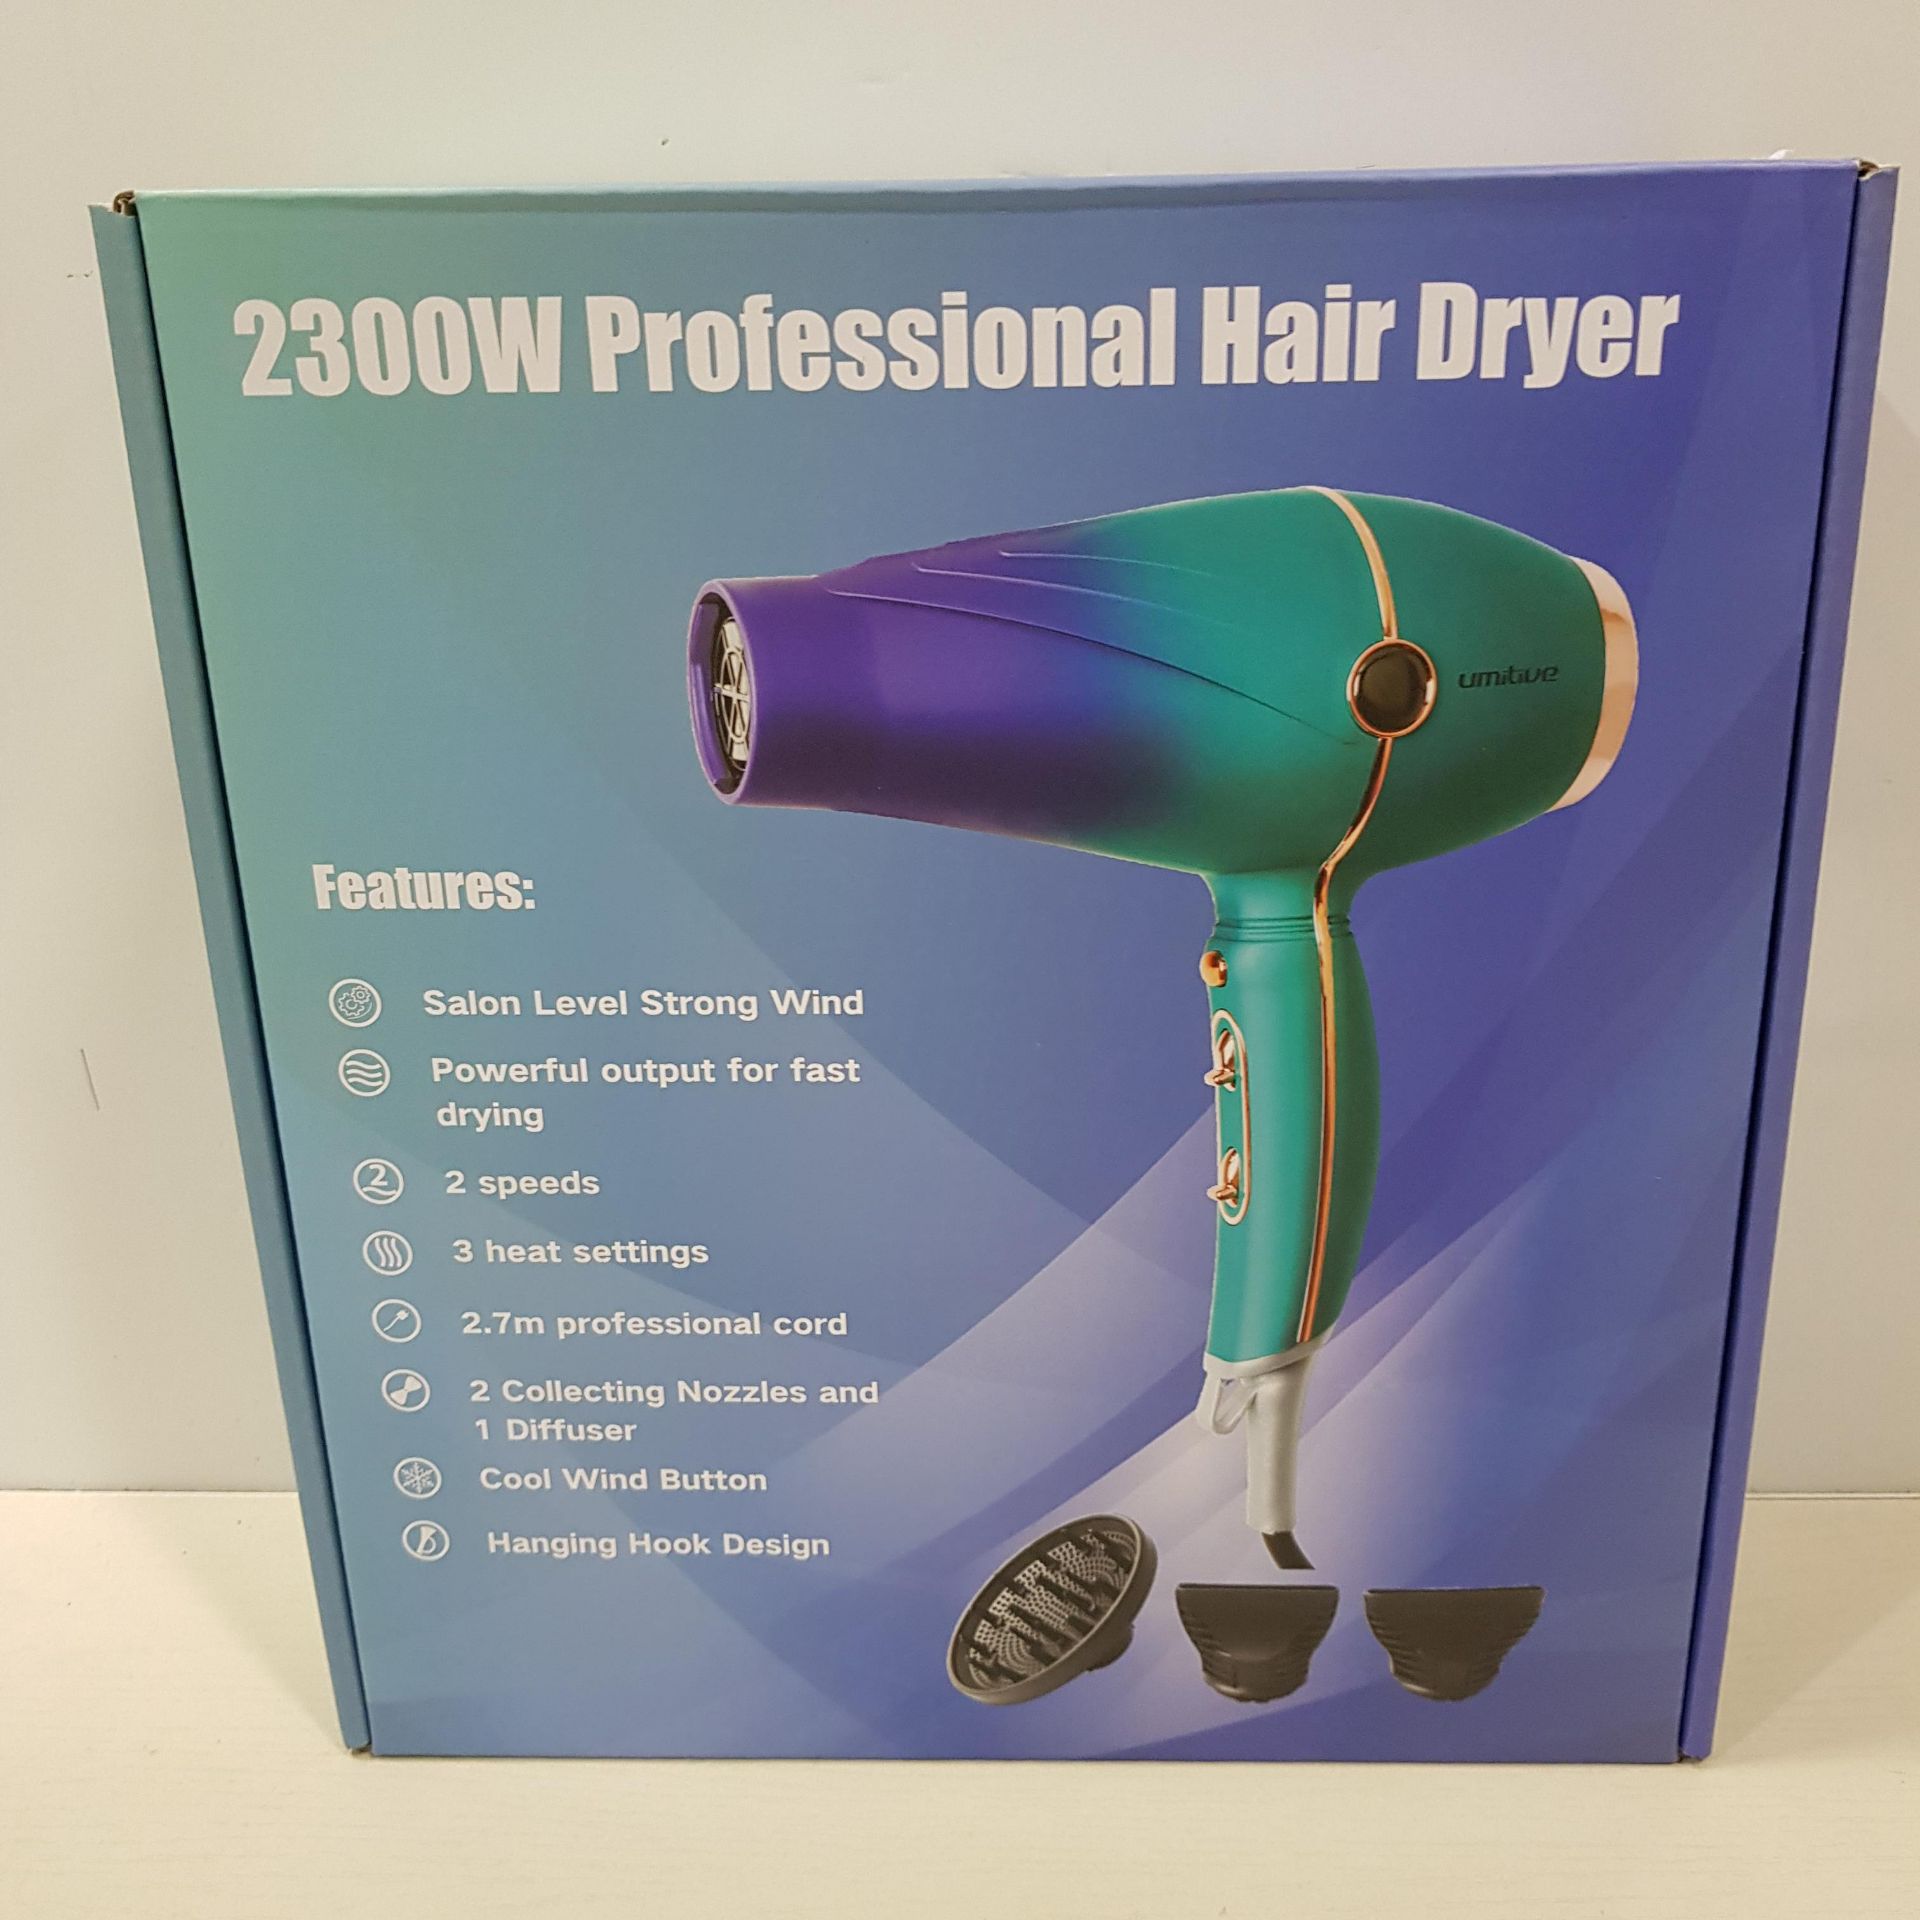 7 X BRAND NEW 2300W PROFESSIONAL HAIR DRYER - 2.7 M PROFFESIONAL CORD - HANGING HOOK DESIGN (